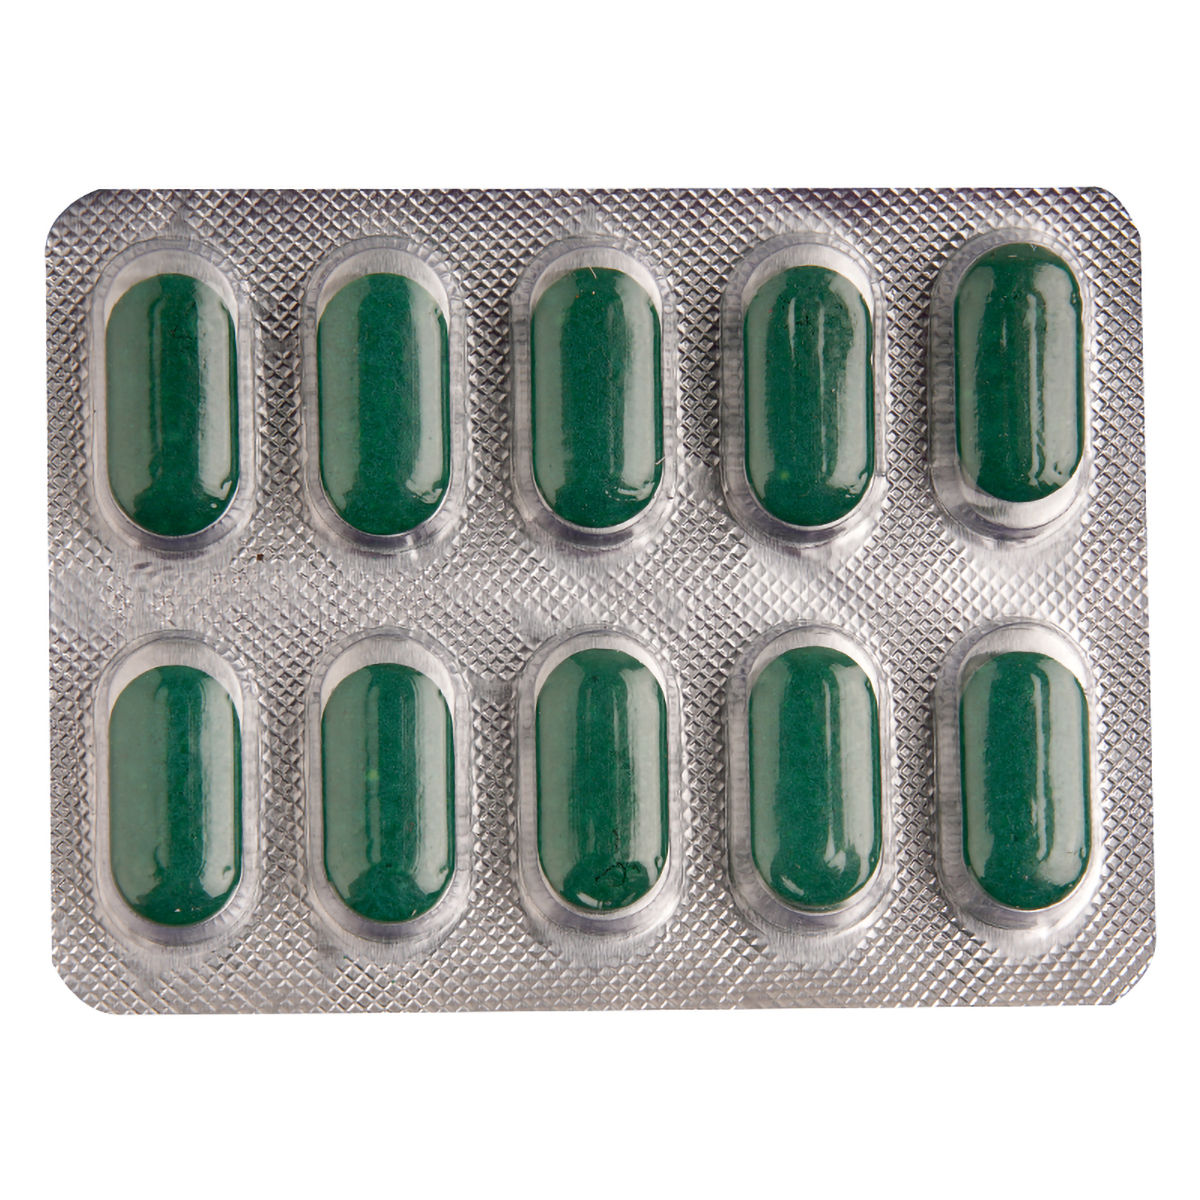 Prontobon, 10 Tablets, Pack of 10 S